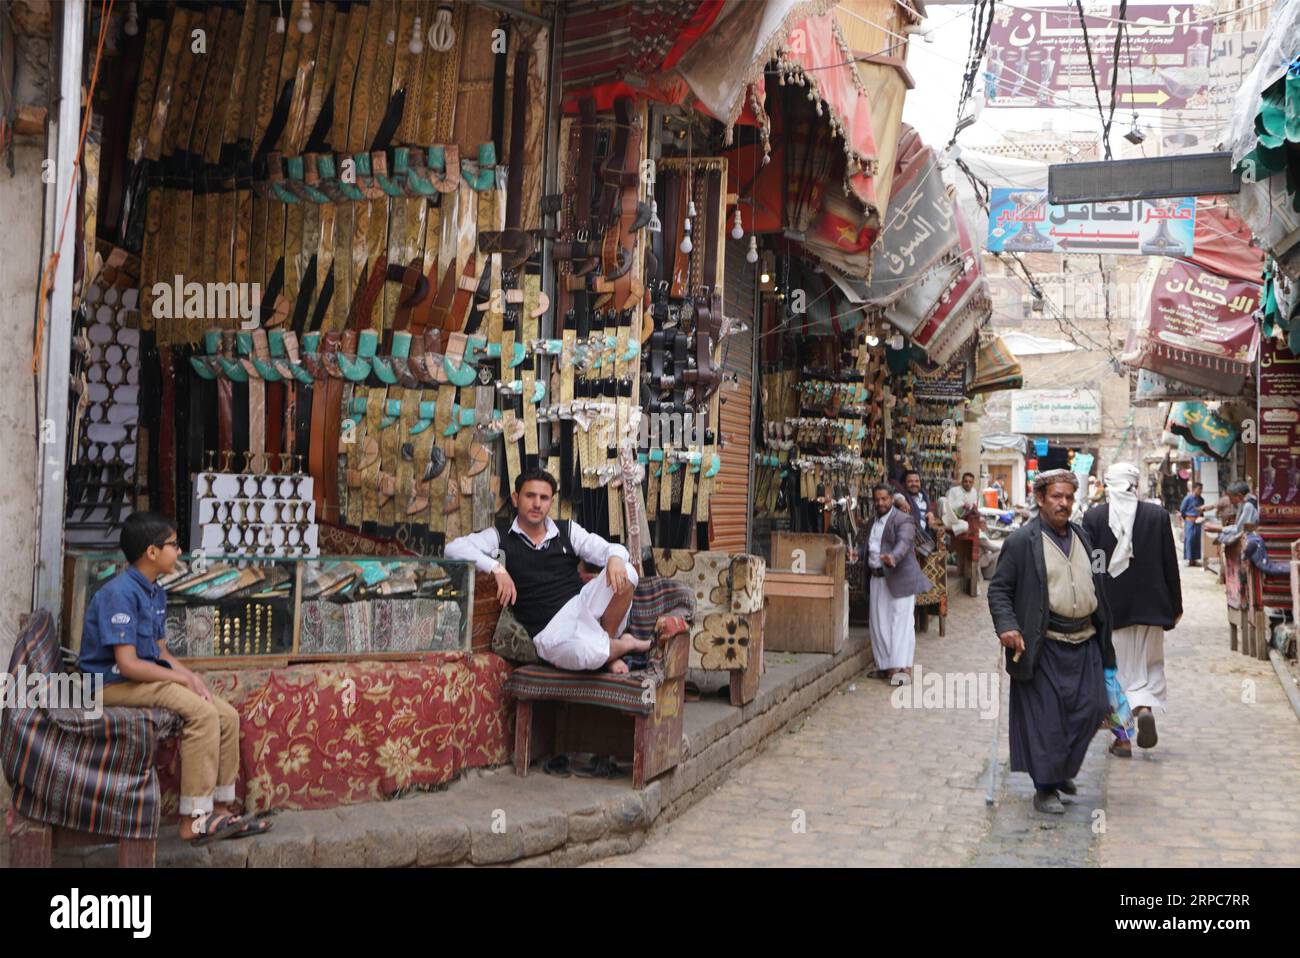 (190626) -- SANAA, June 26, 2019 (Xinhua) -- Jambiya shops are seen in the Old City of Sanaa, Yemen, on June 26, 2019. The Yemenis have not been affected by the Western stylish changes as they still proudly keep their ancestors traditional dress, especially the wear of the horn-handle knife Jambiya for nearly 3,000 years. Jambiya is a specific dagger with a T-shaped handle made from rhinoceros horns or other animals bones and decorated with gold and other precious metals, and a short and curved double-edged knife. (Xinhua/Mohamed al-Azaki) TO GO WITH Feature: Horn-handle knife Jambiya symboliz Stock Photo